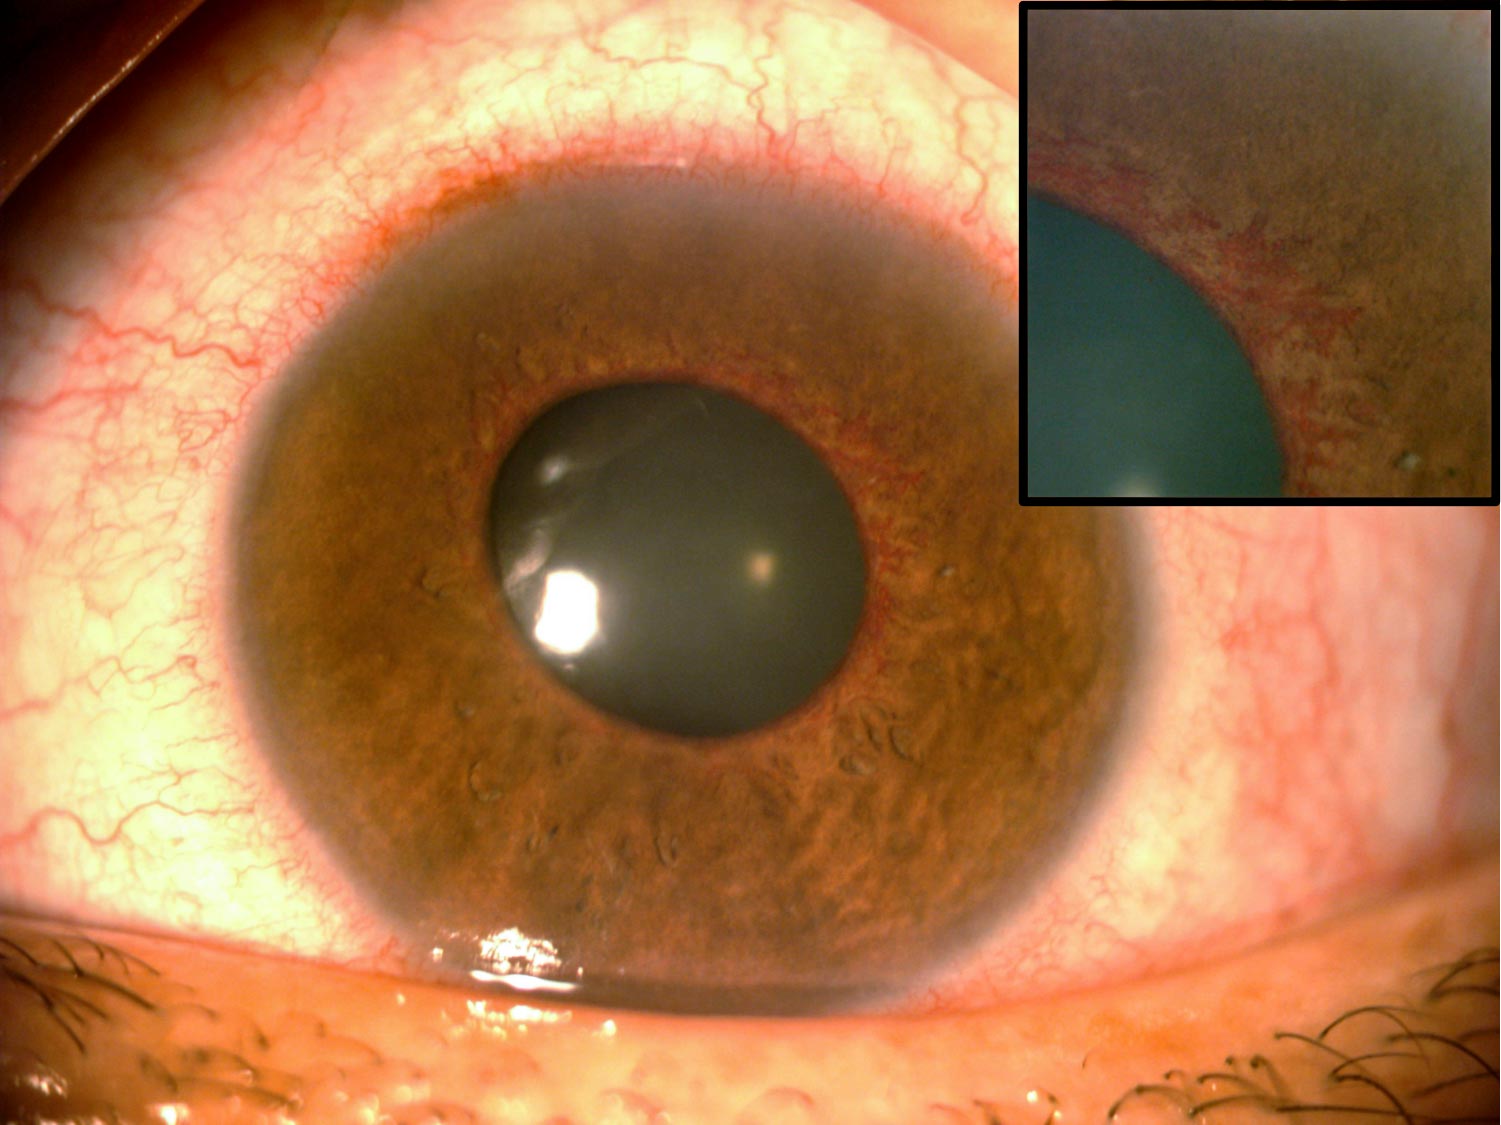 Figure 1: A diabetic patient that presented with severe pain, blurred vision and red eye. Signs of the acute stage of neovascular glaucoma are seen in this photo: ciliary injection, mild corneal epithelial oedema, and rubeosis iridis. Top right: An enlarged view of rubeosis iridis. Photo Credit: © University Hospital and Faculty of Medicine, Autonomous University of Nuevo Leon (UANL), Mexico CC BY-NC 4.0